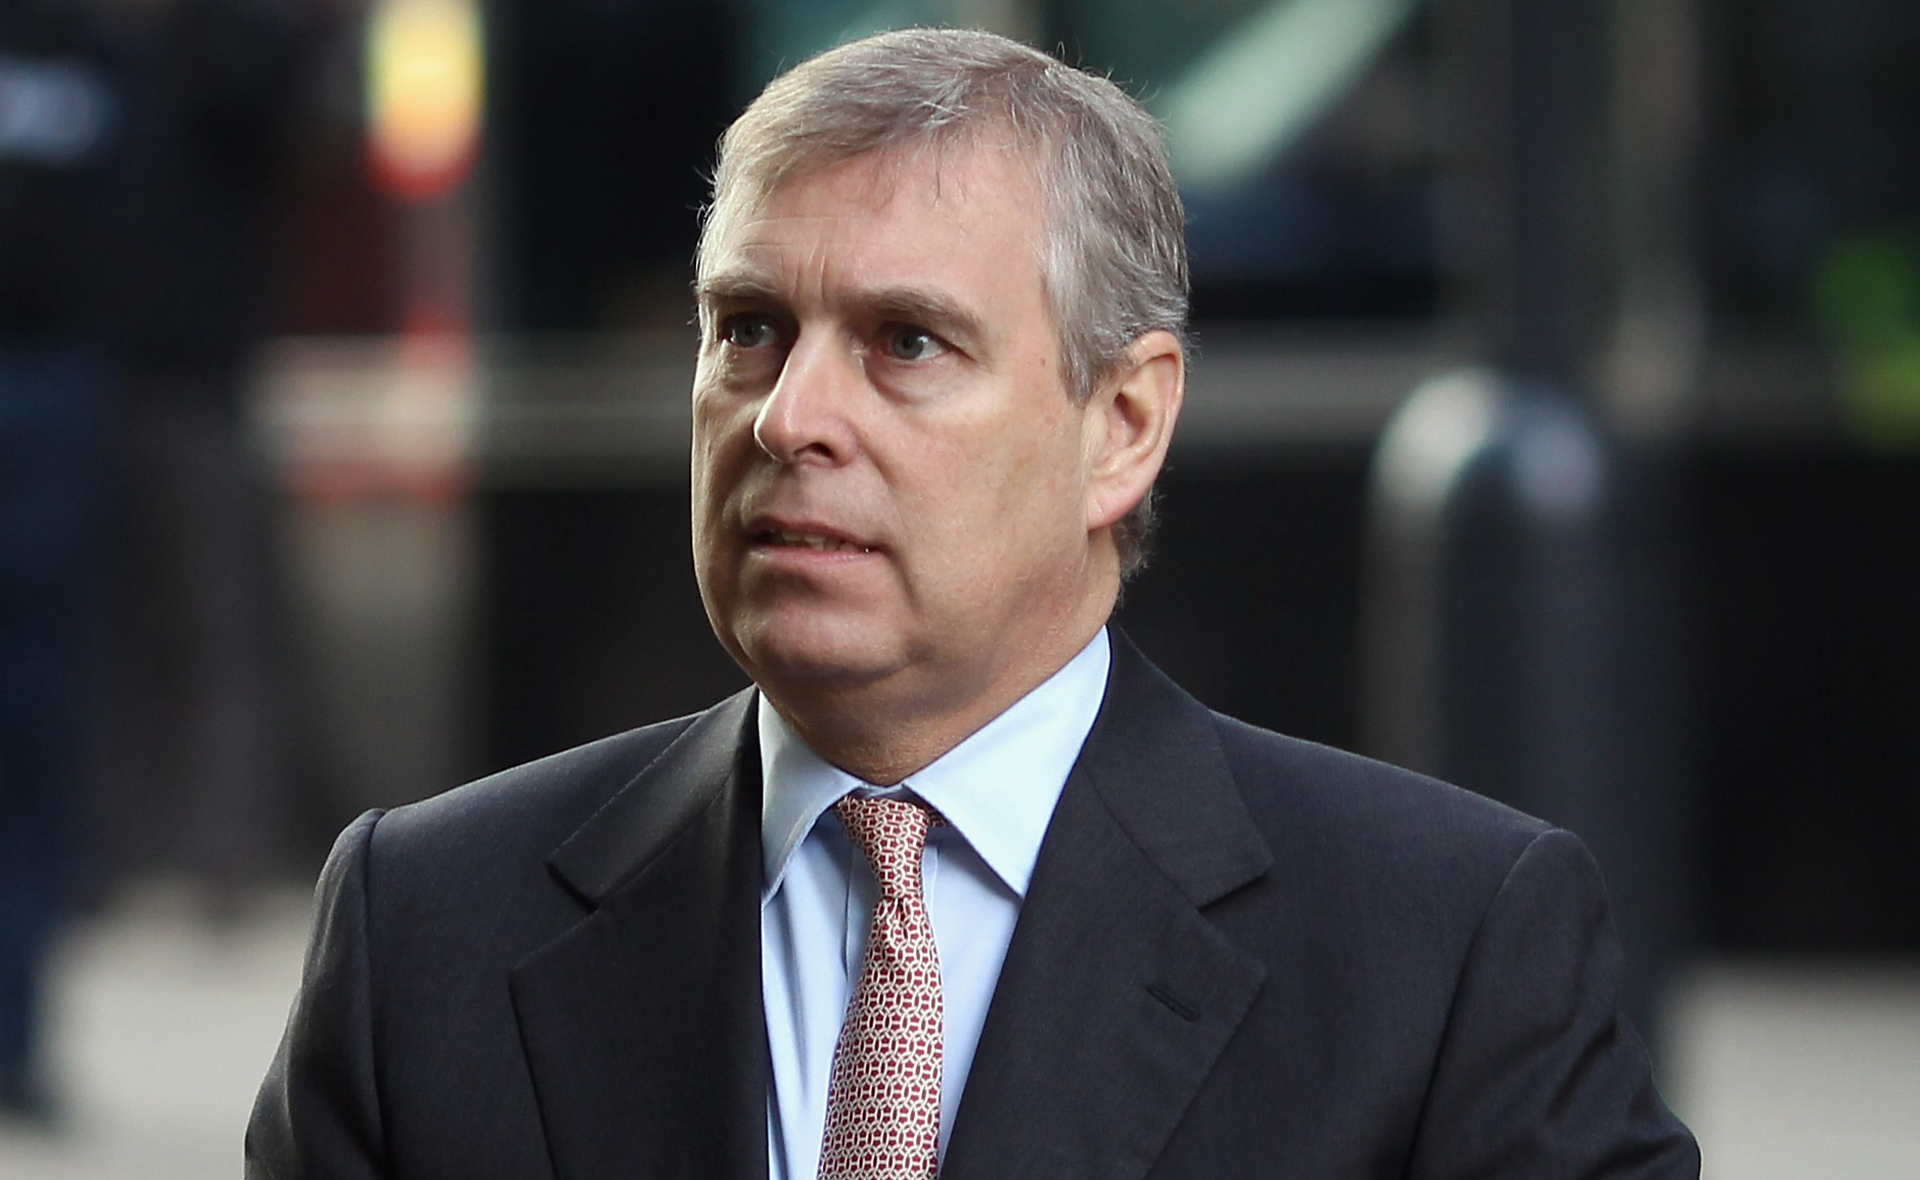 Prince Andrew could face Epstein victim Virginia Giuffre in court as early as next year